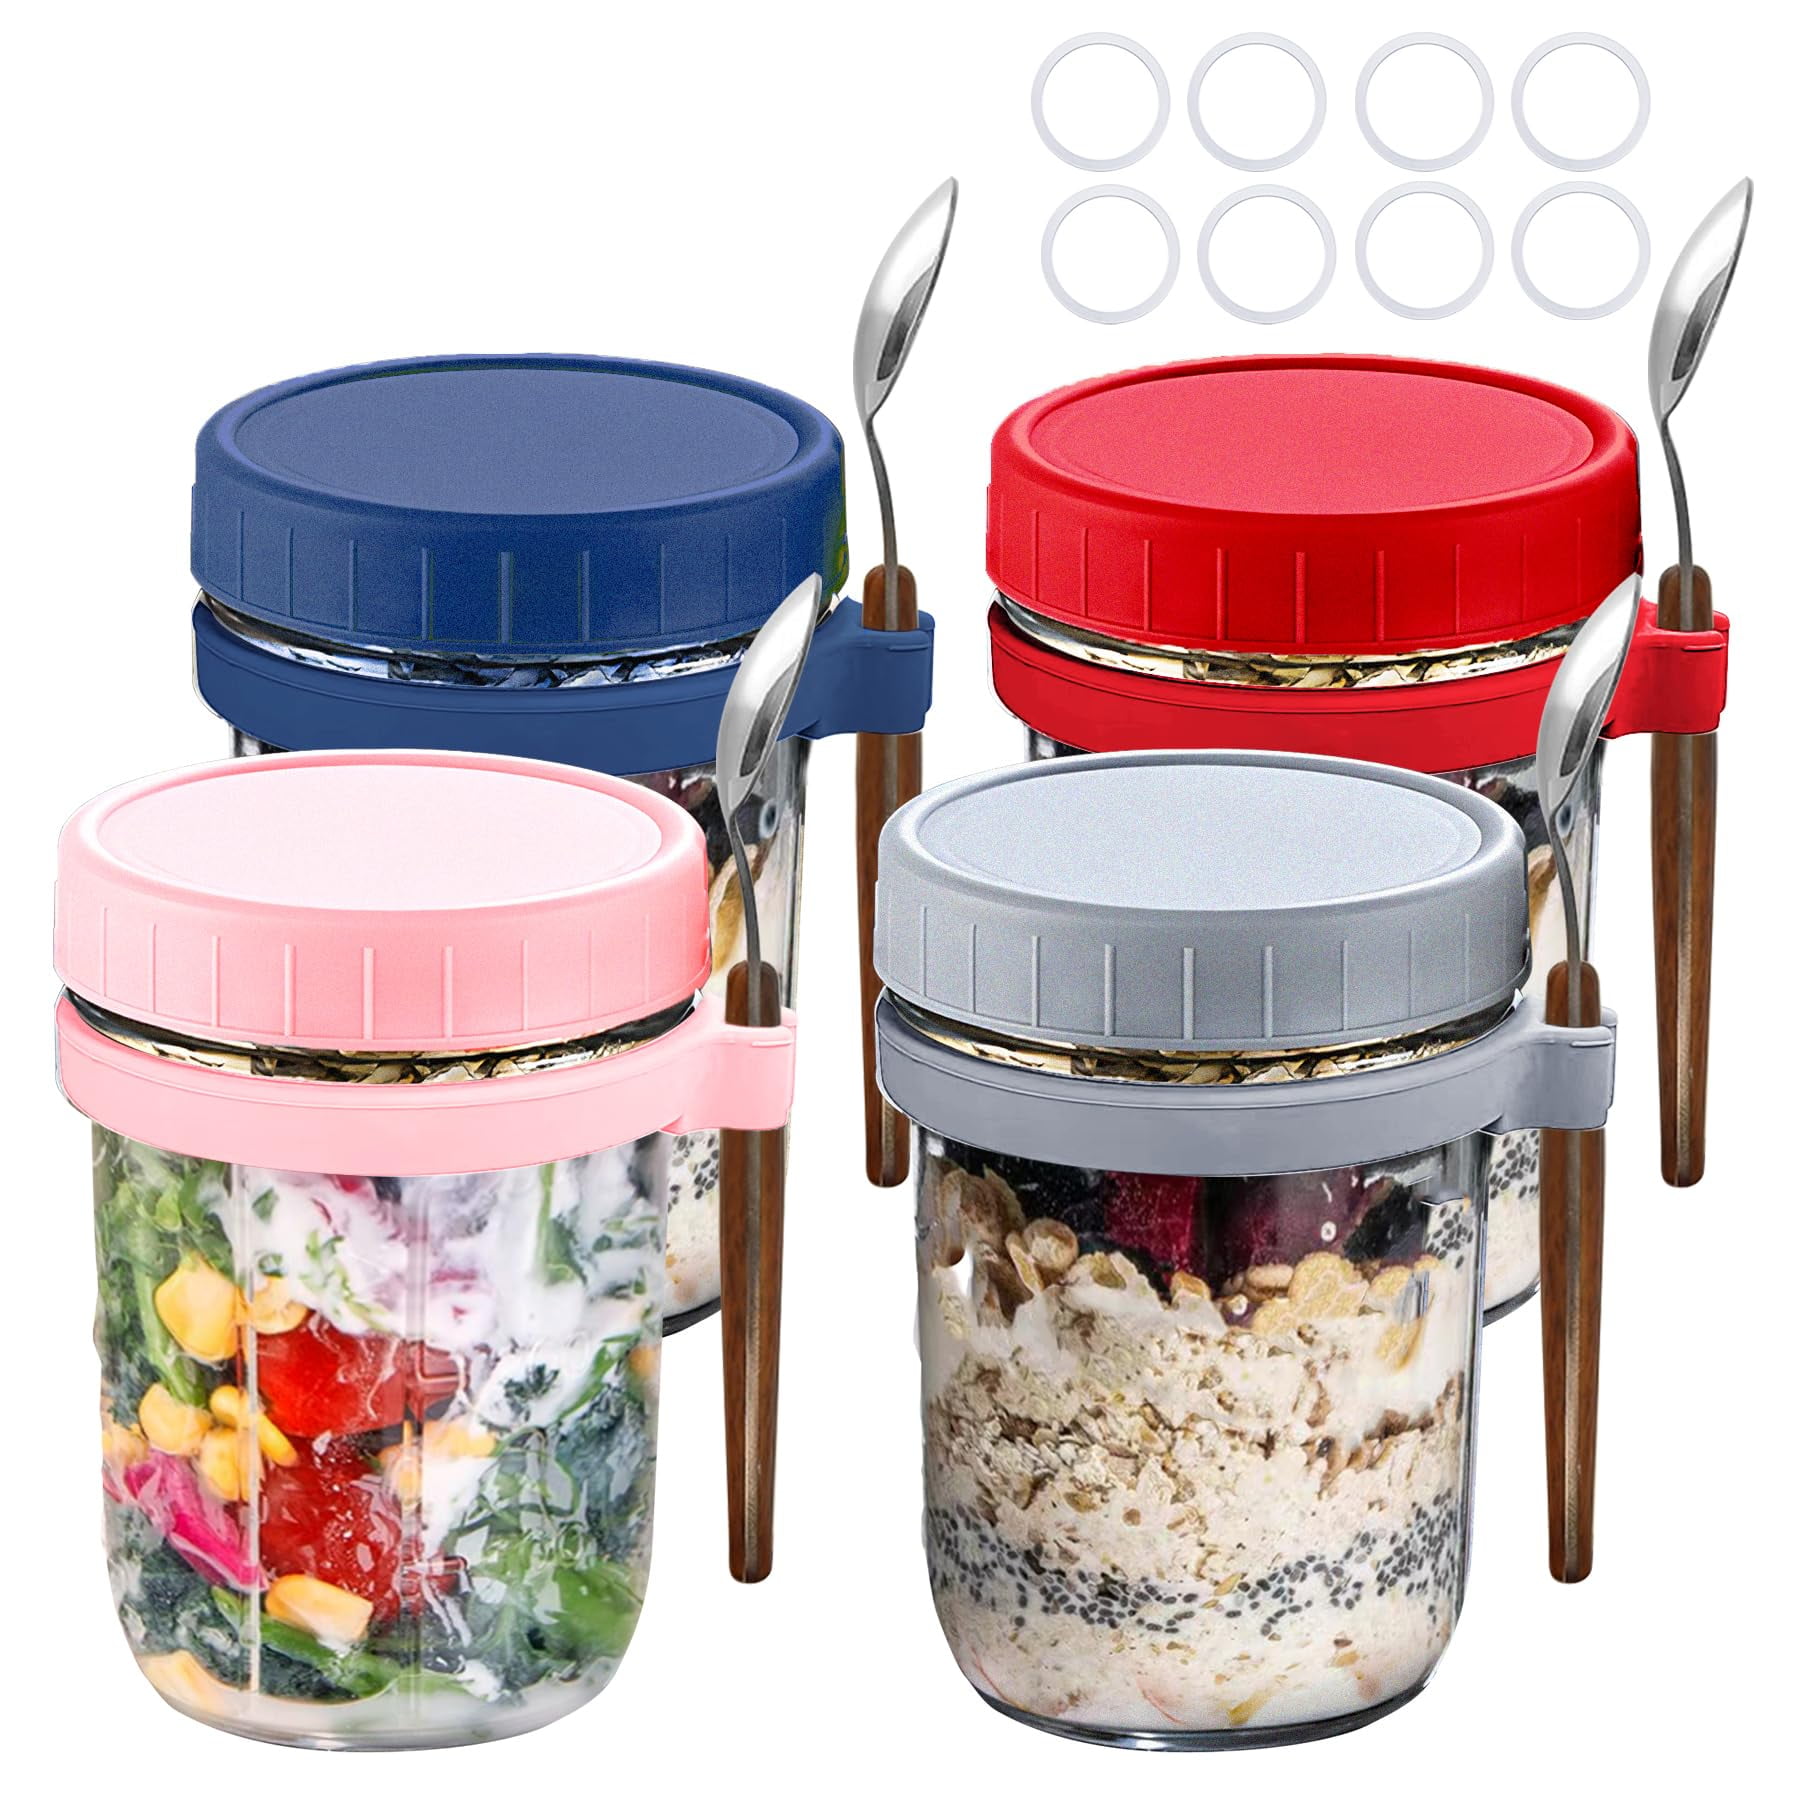 FORHVIPS Glass Lunch Breakfast Containers on the Go,16 fl oz/2 Cup Oat ...